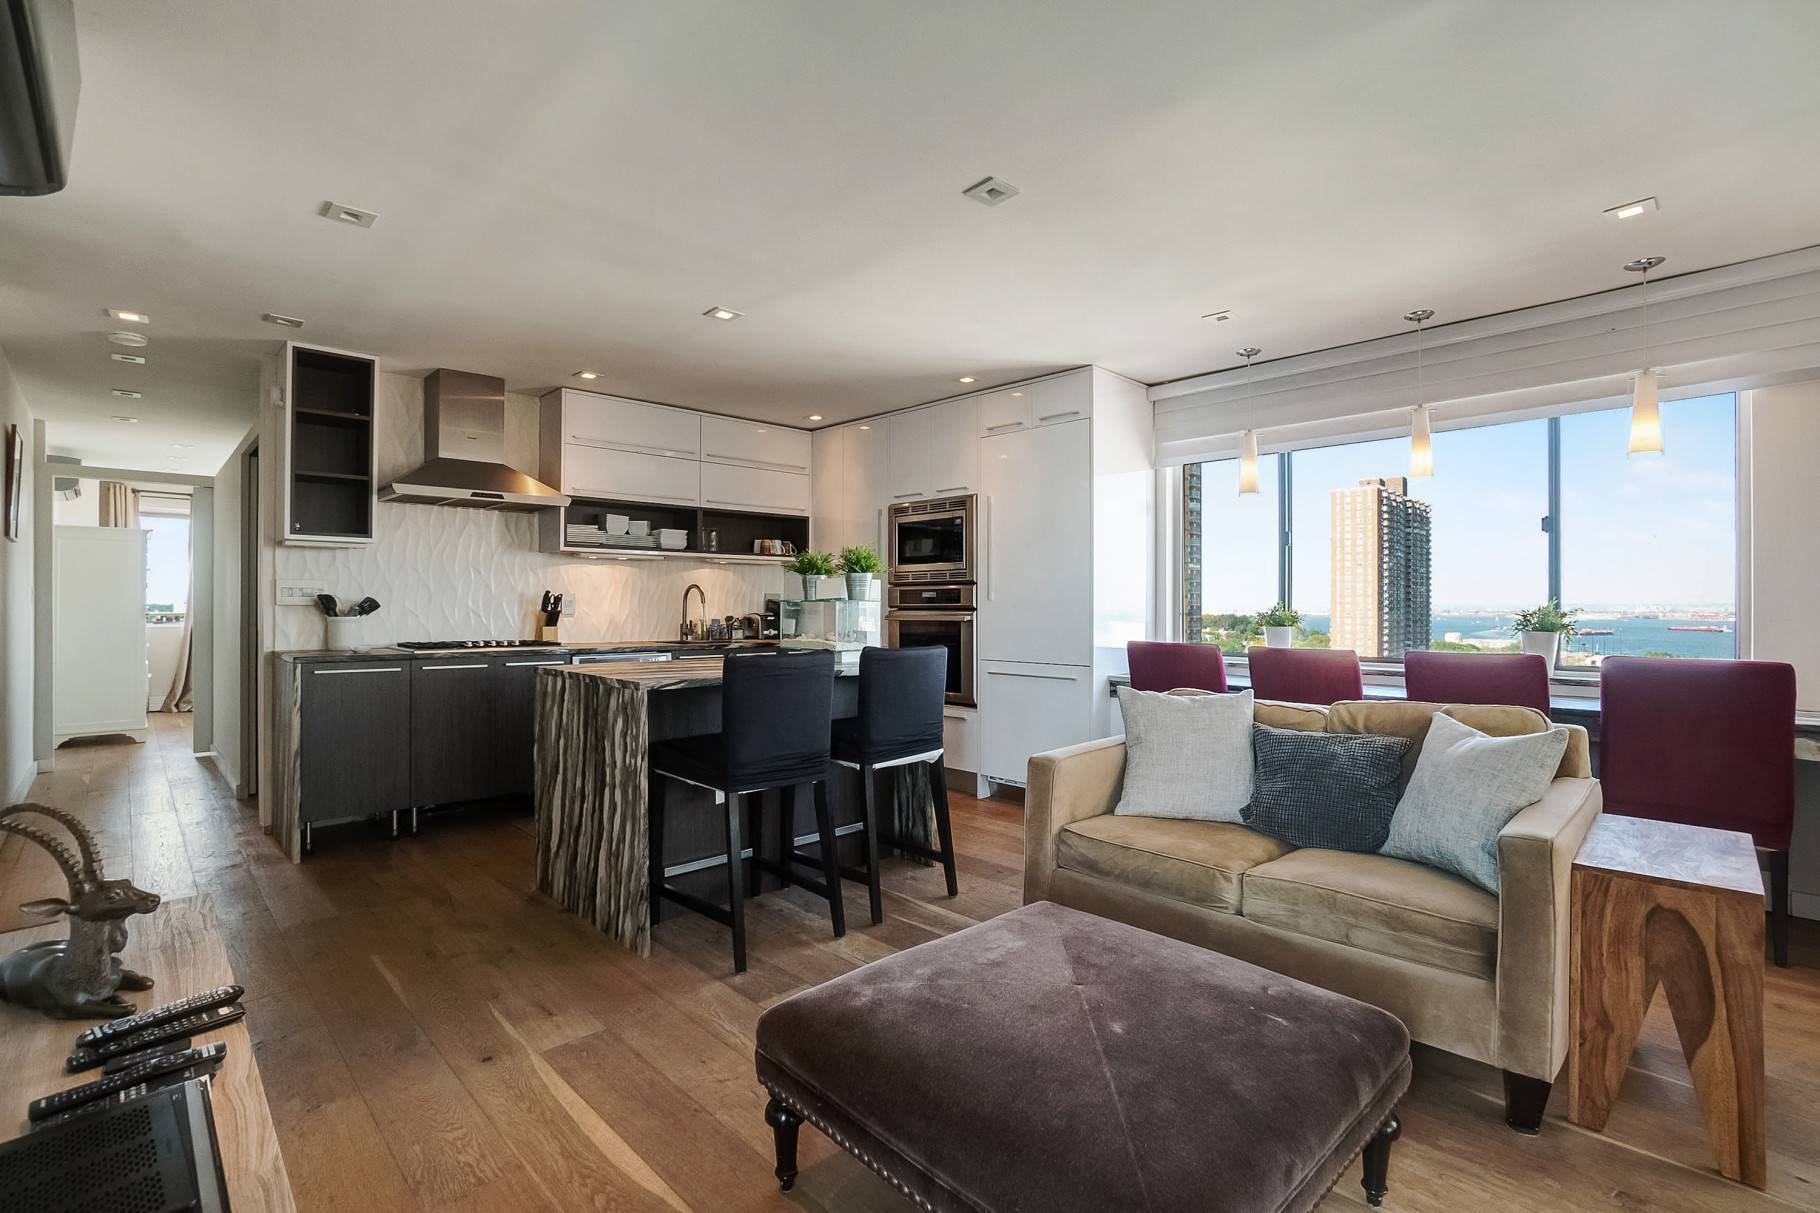 Stunning views, tremendous outdoor space, and versatile living areas describe this triplex penthouse condo on the border of Sunset Park and Bay Ridge.